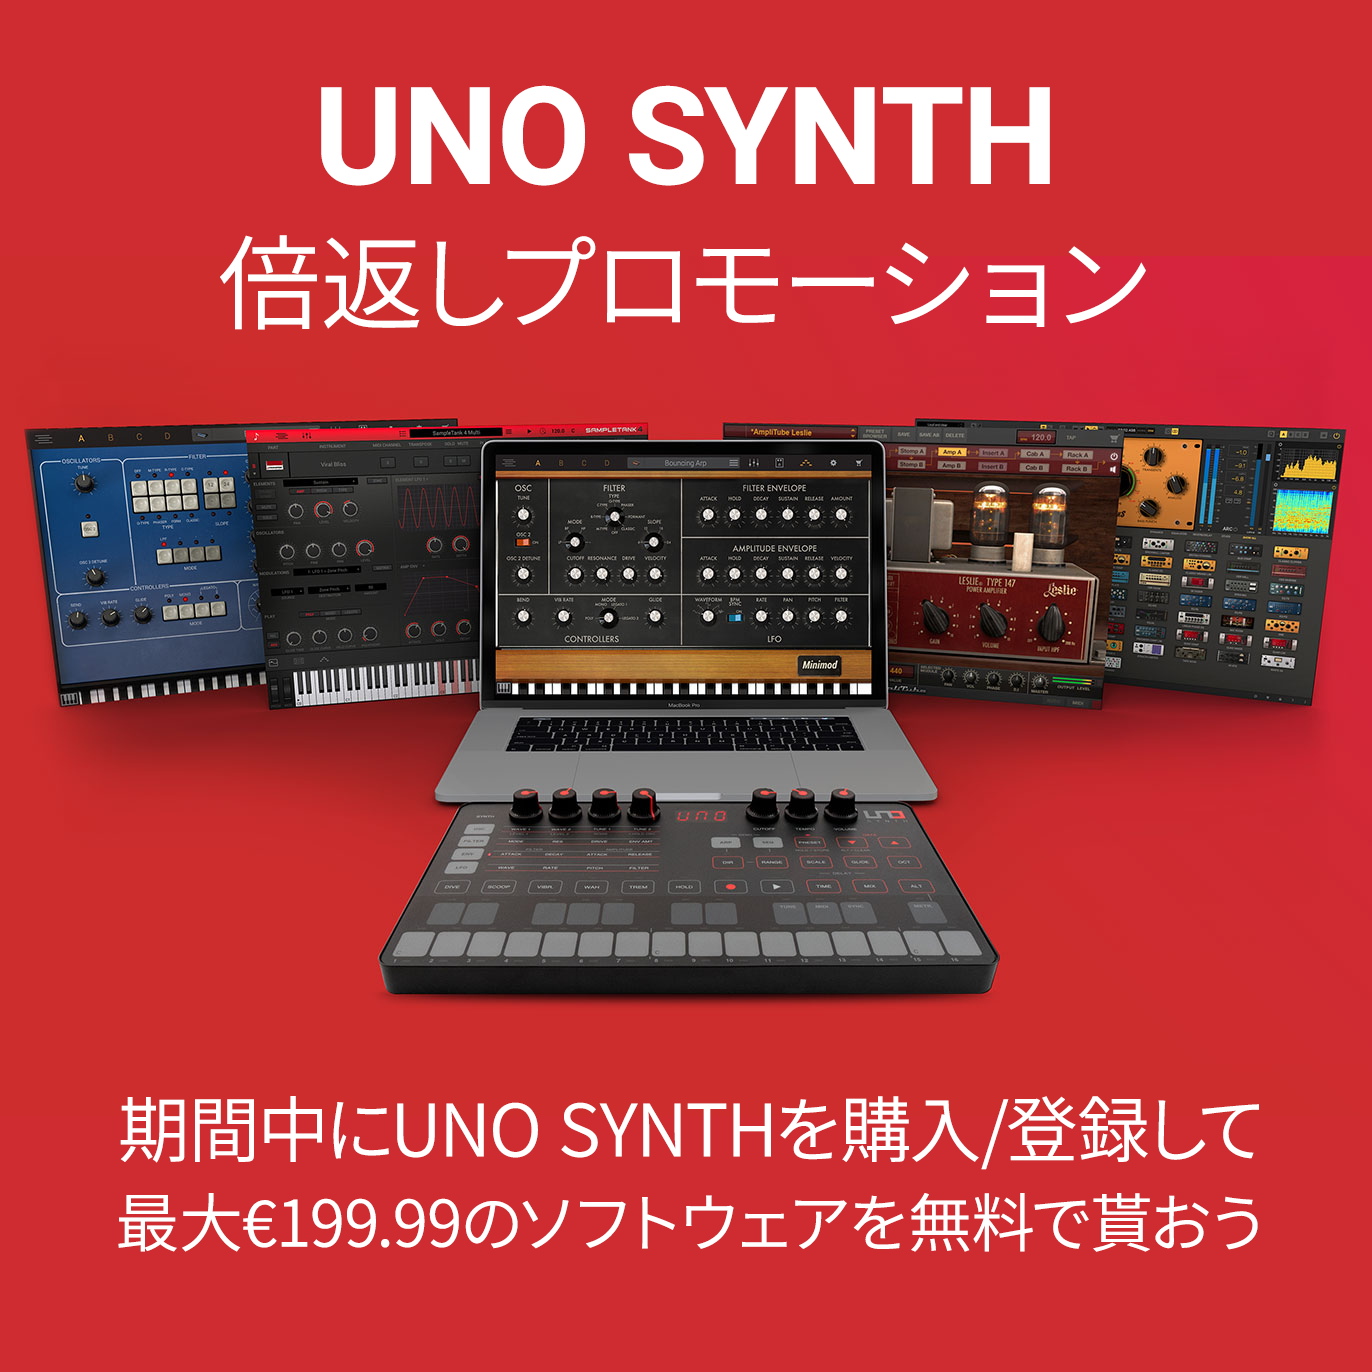 Uno Synth「倍返し」プロモーション